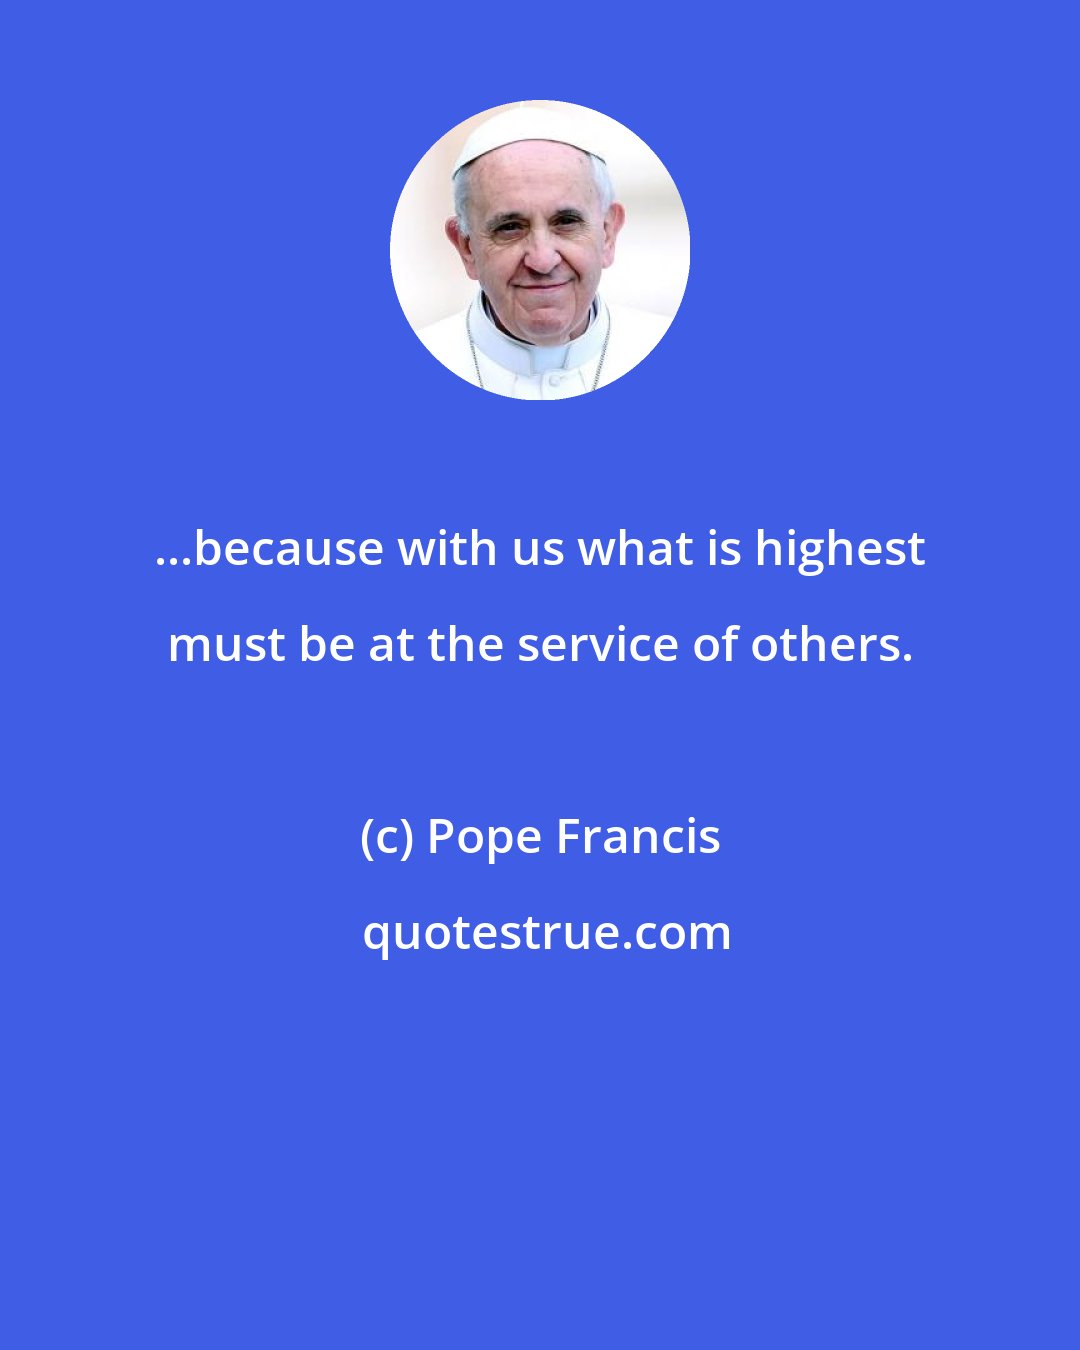 Pope Francis: ...because with us what is highest must be at the service of others.